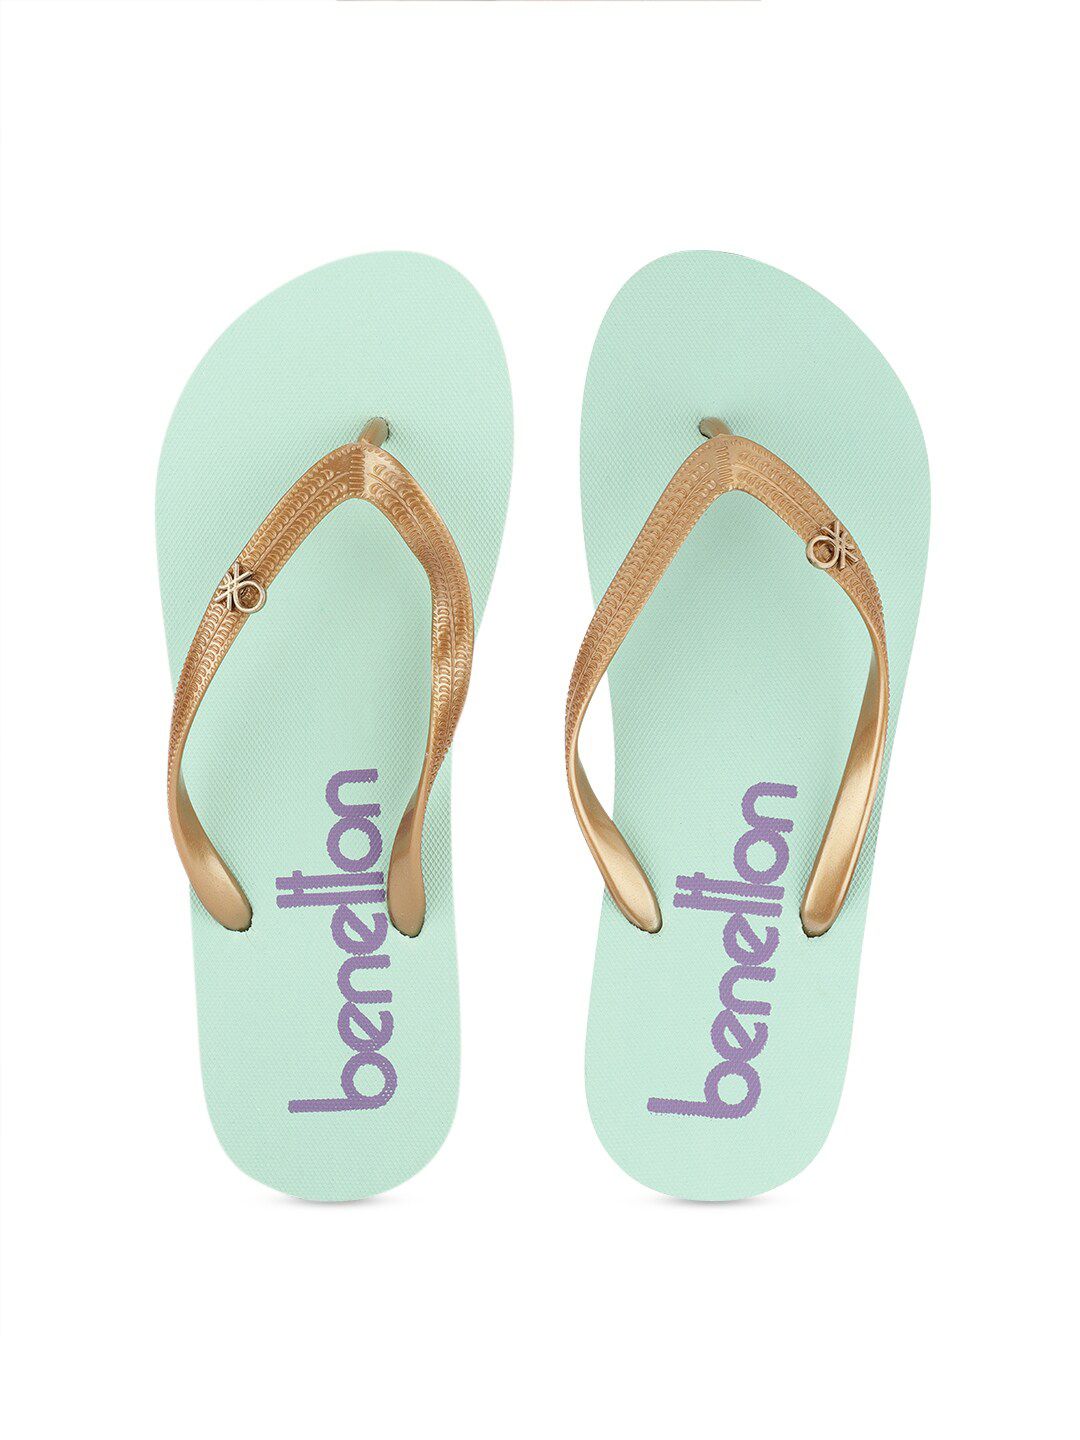 United Colors of Benetton Women Sea Green & Gold Solid Rubber Thong Flip-Flops Price in India